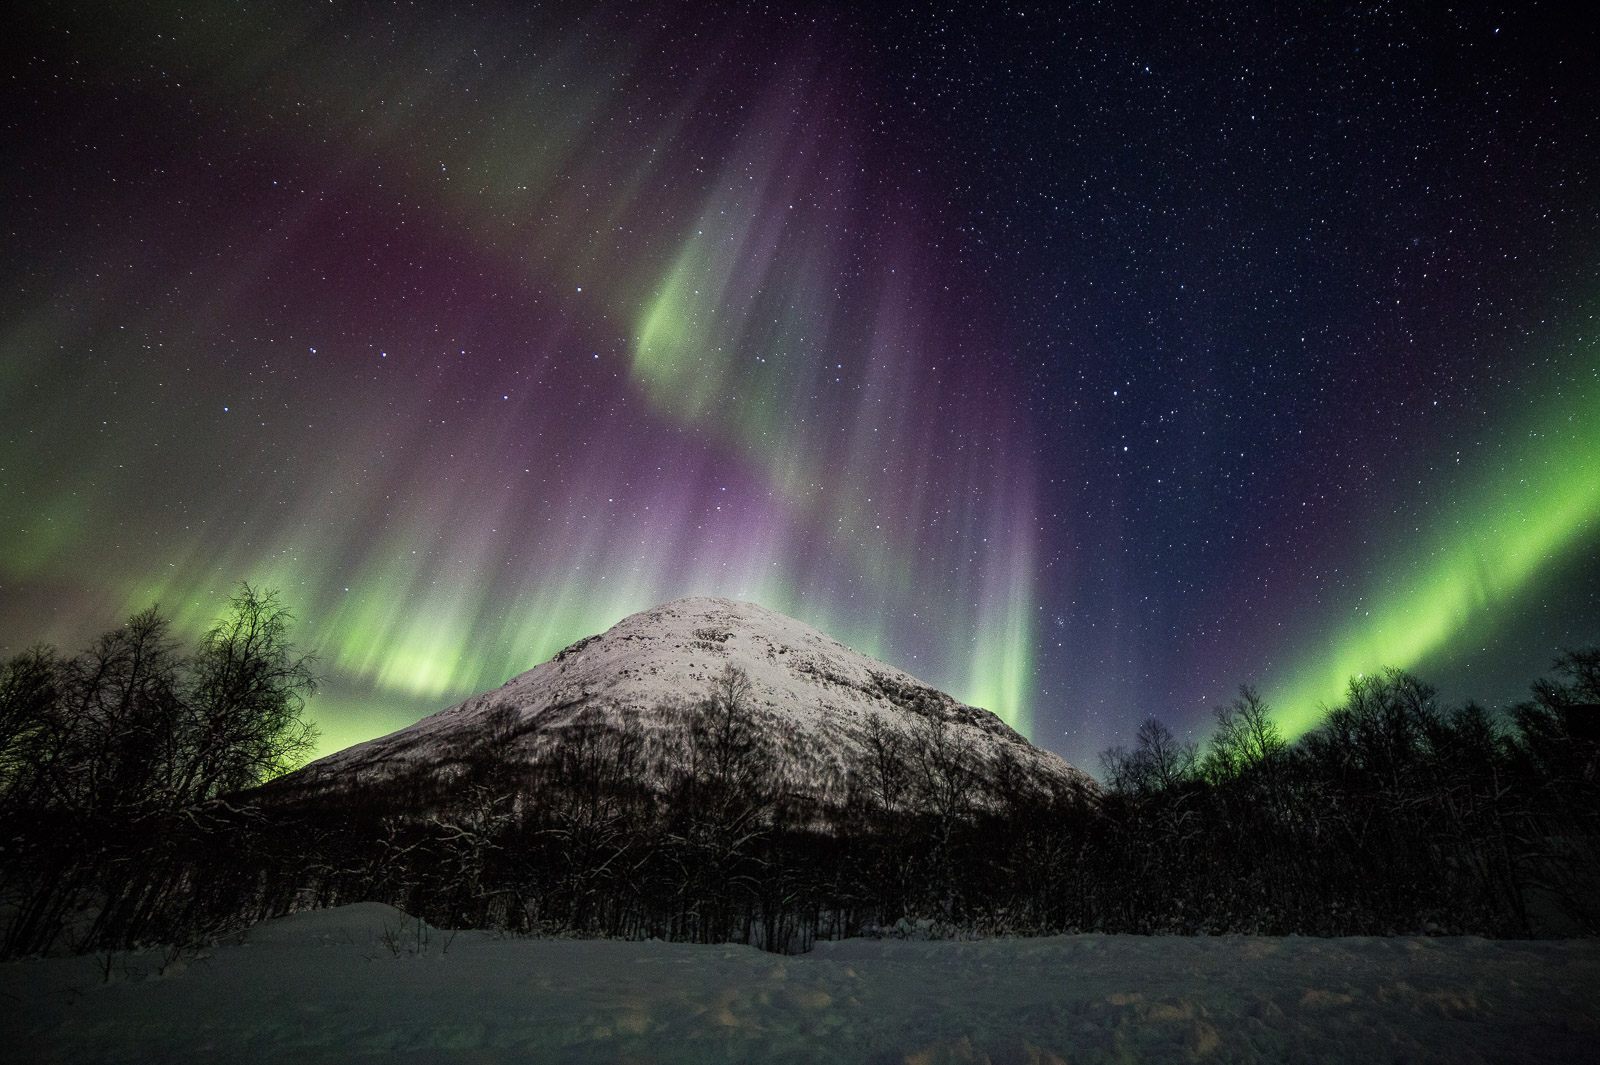 Violet and green solar storm above the peaks of Tamokdalen Valley © William Copeland